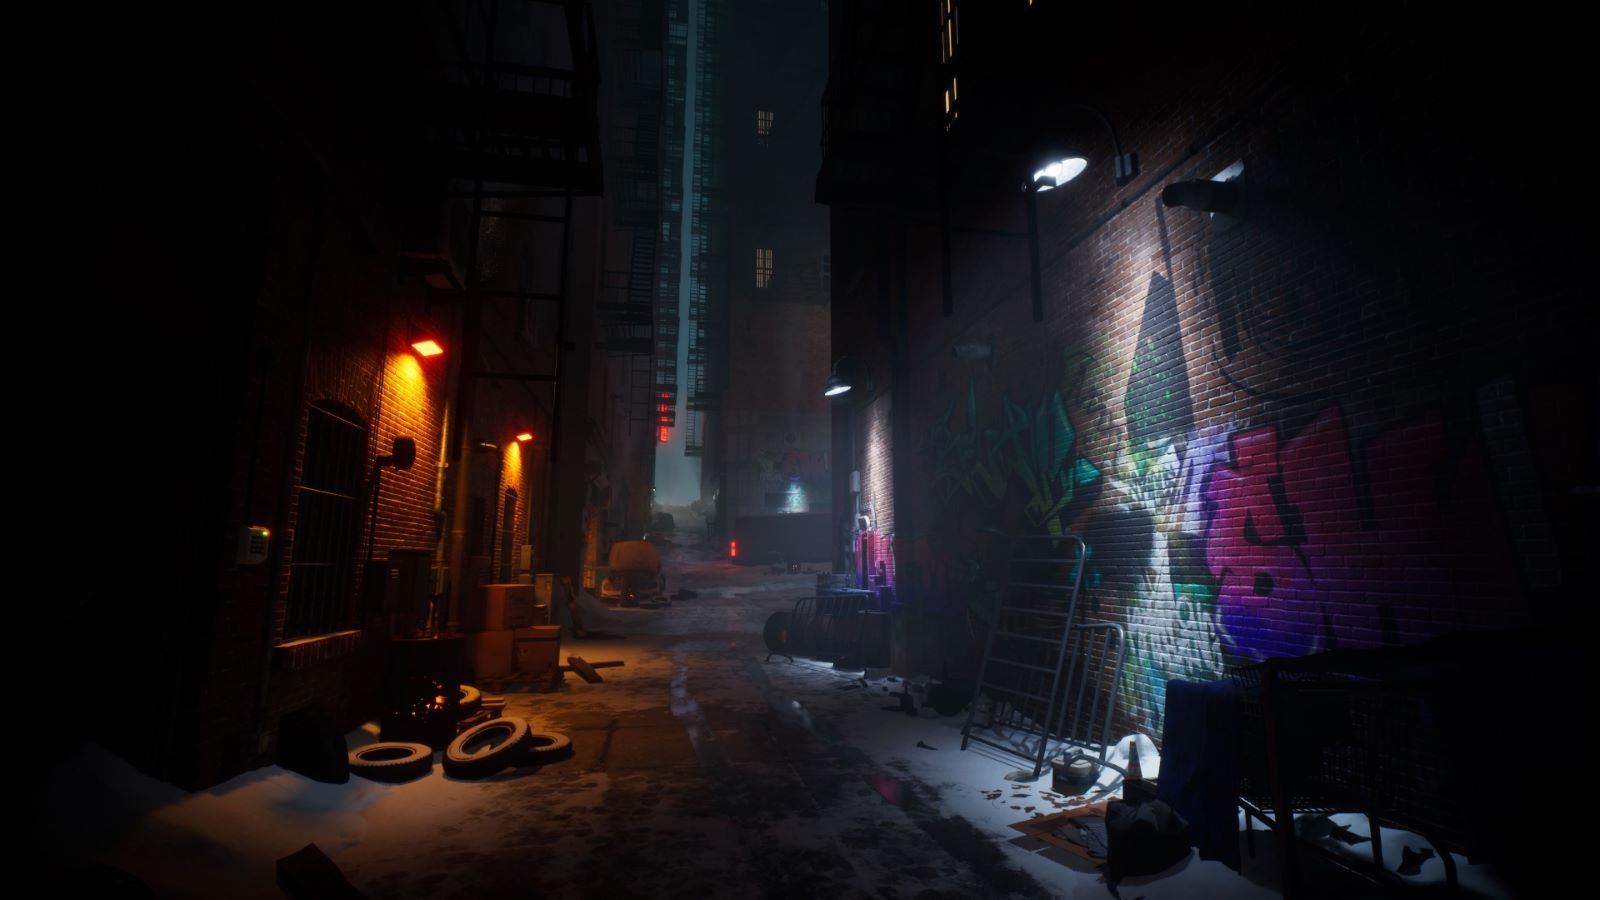 Brujah clan gameplay revealed for Vampire: The Masquerade